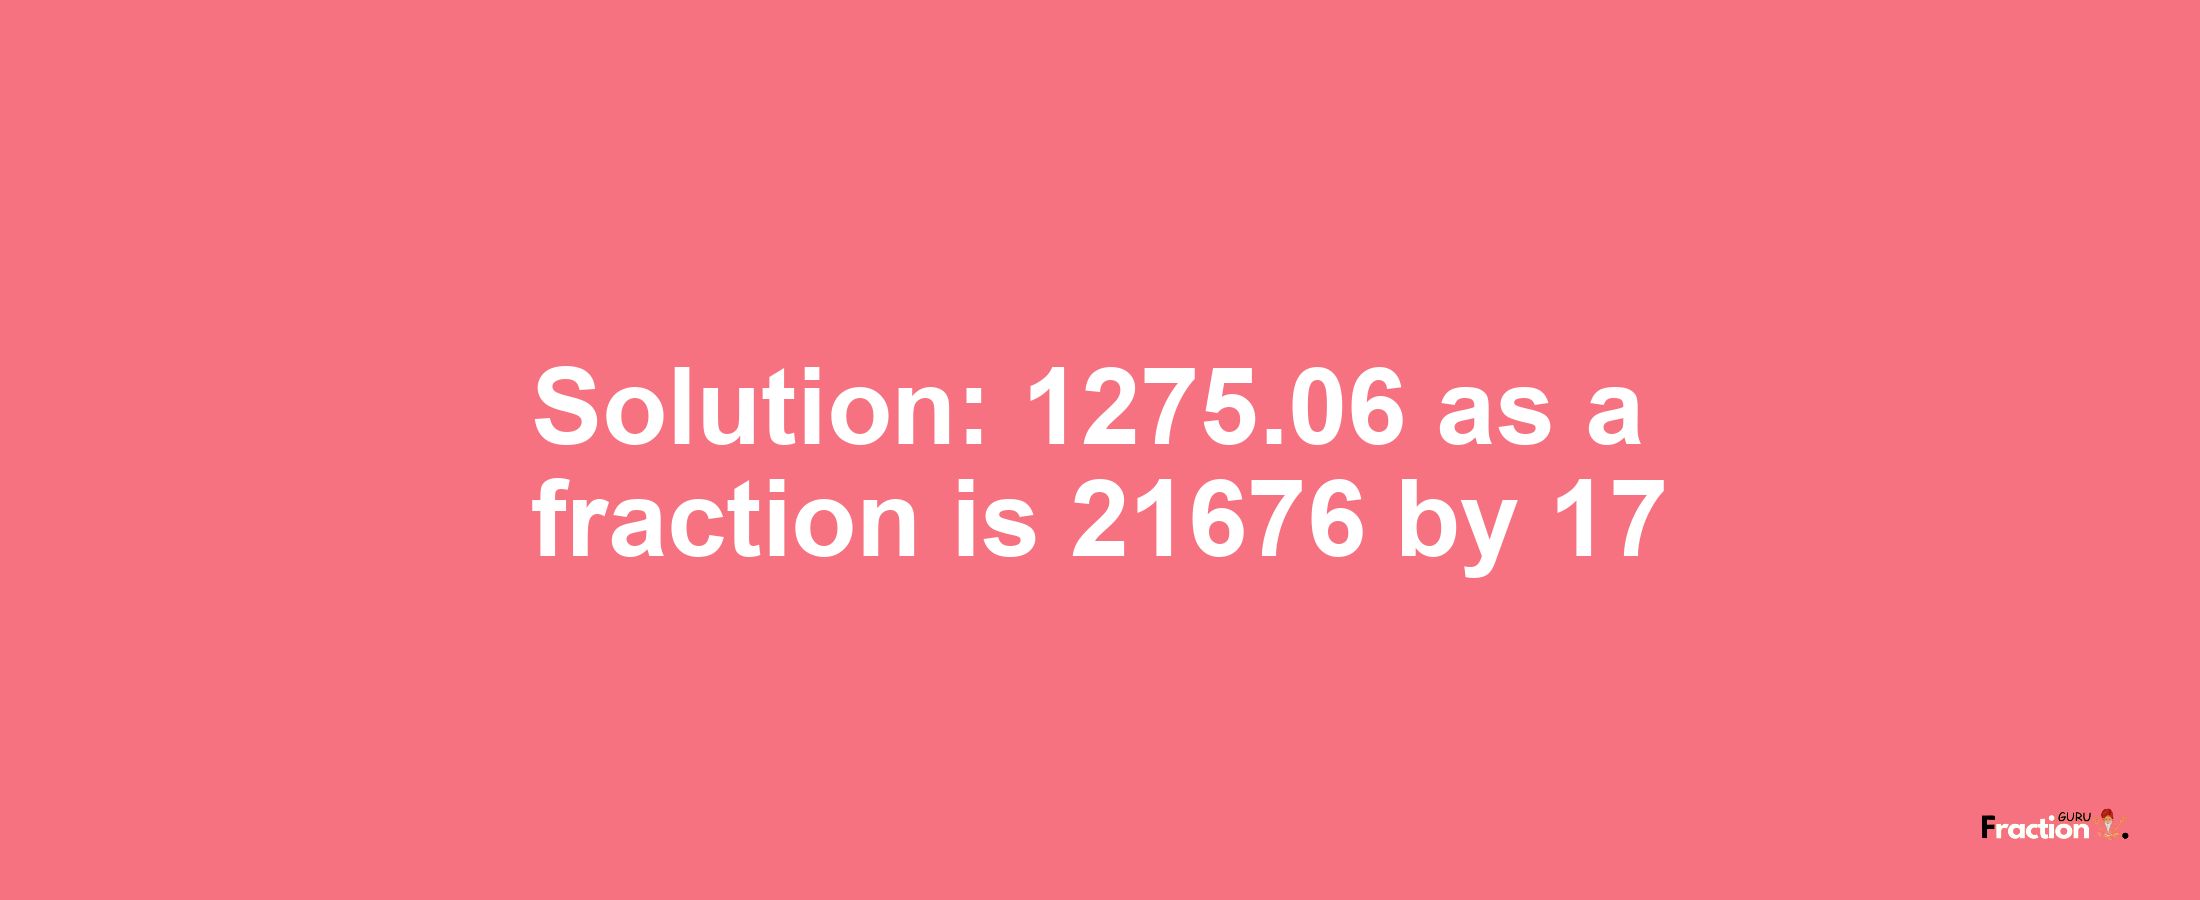 Solution:1275.06 as a fraction is 21676/17